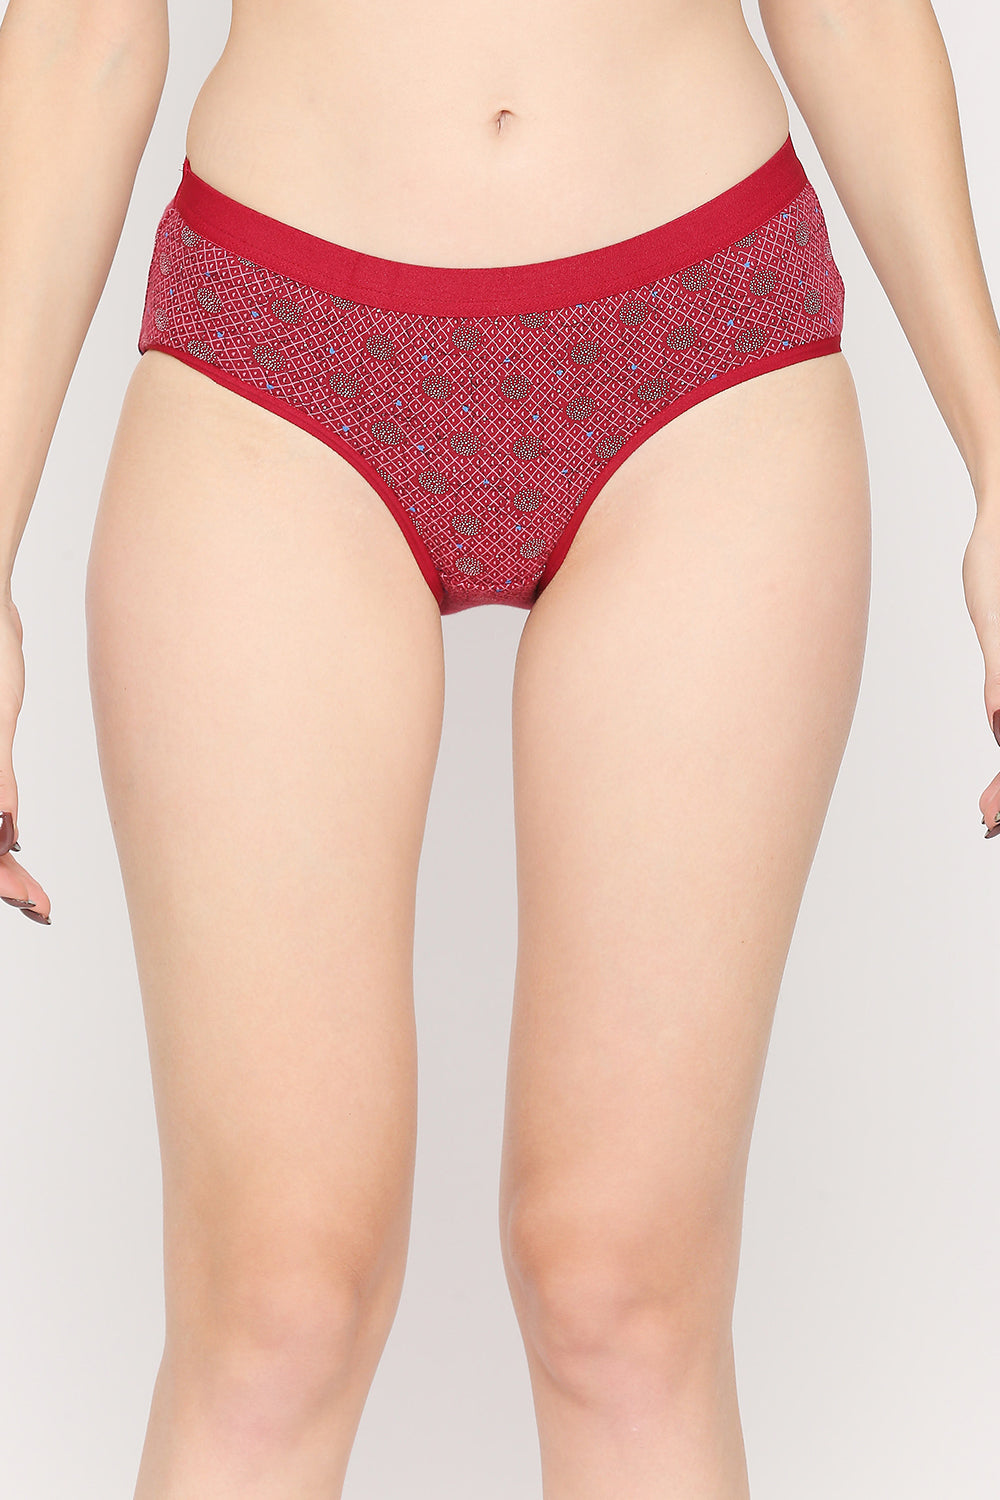 Red Rose Cotton Medium Rise Hipster Panties - Multicolor Pack of 3